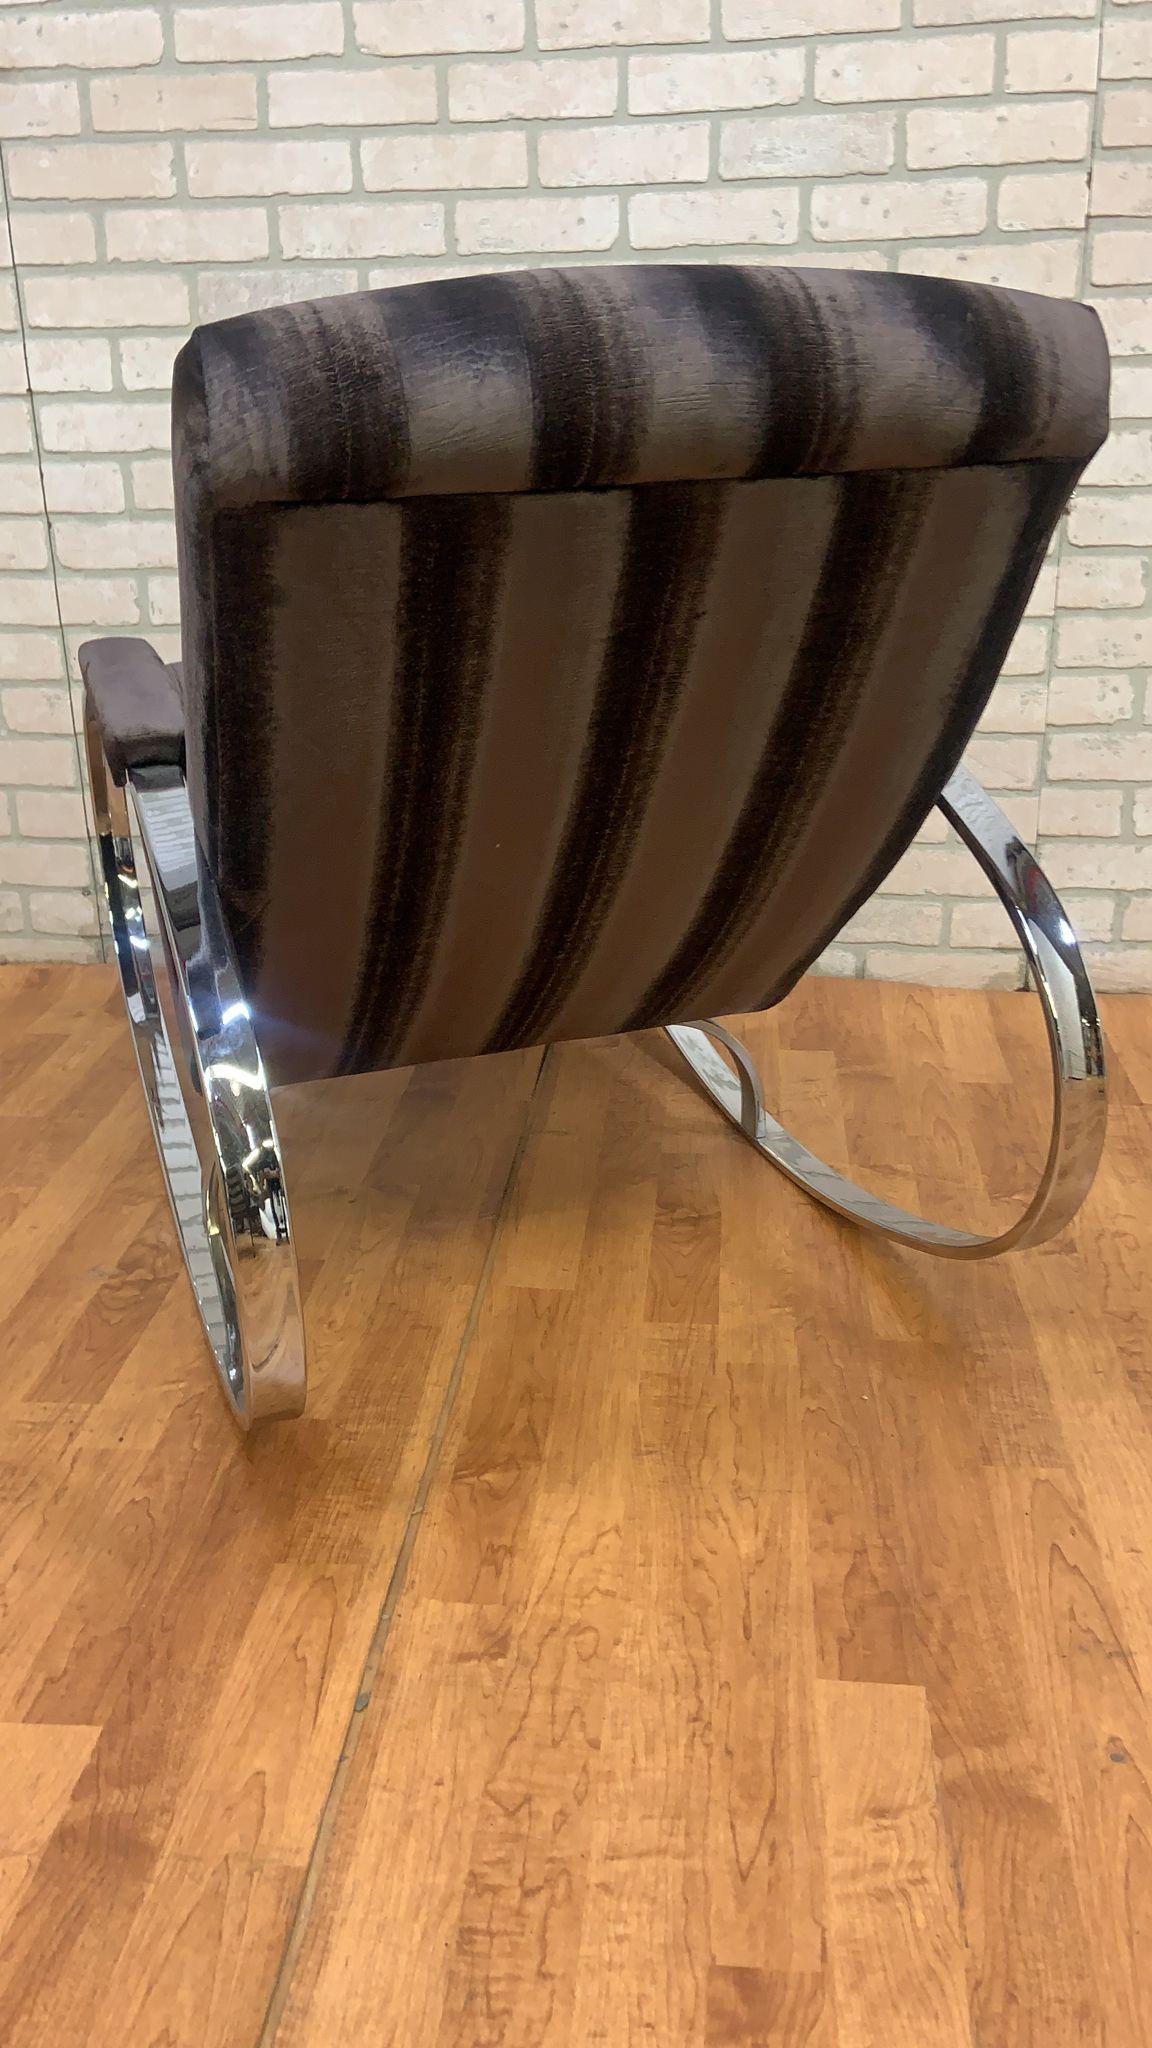 Mid-20th Century Midcentury Milo Baughman Chrome Flat Bar Oval Rocking Chair Newly Upholstered For Sale